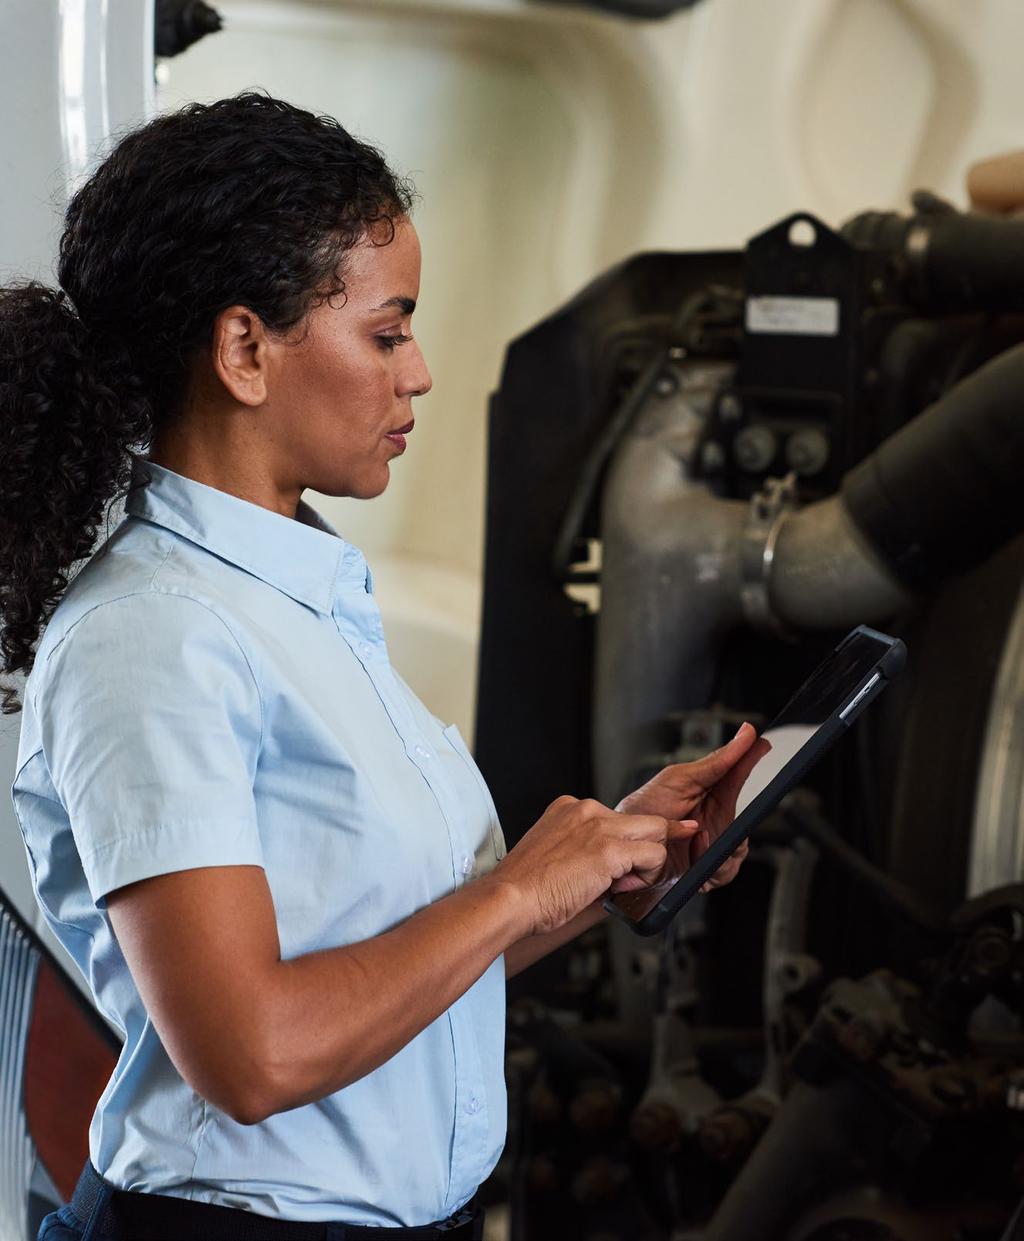 5 Don t forget about vehicle maintenance Something to think about: Do you know when your vehicles are due for maintenance? If not, it could be costing you more than you think.